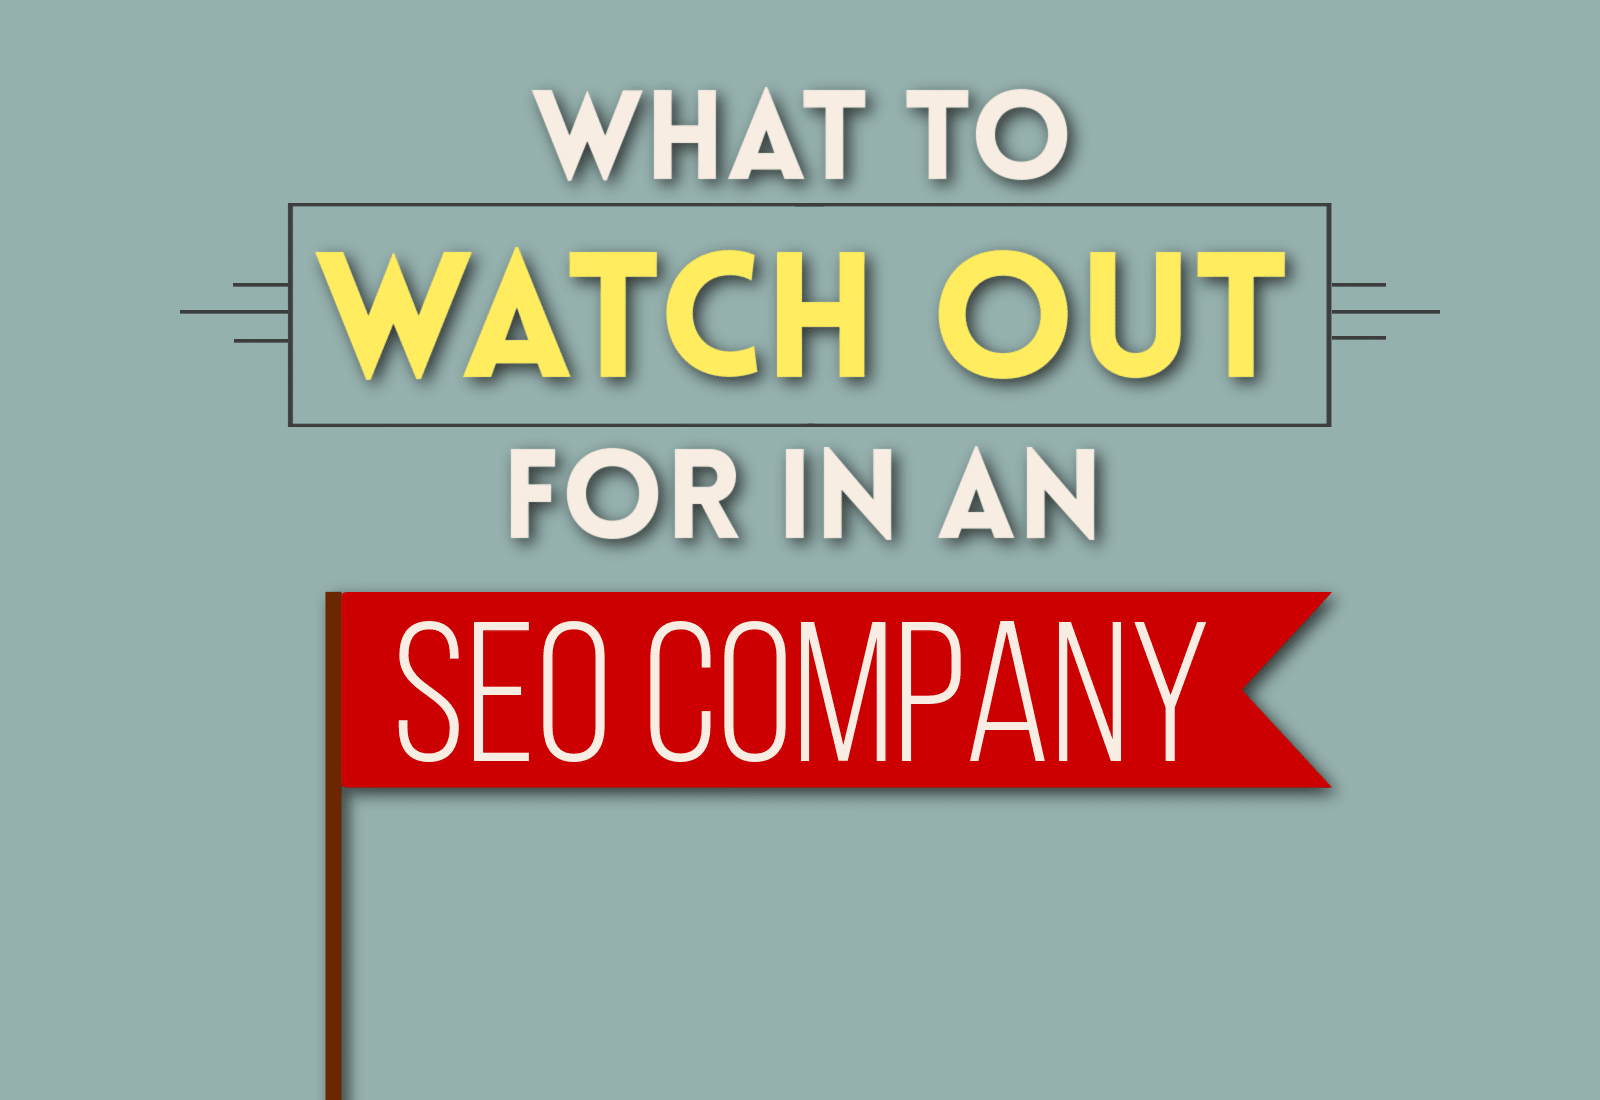 What To Watch Out For In an SEO Company